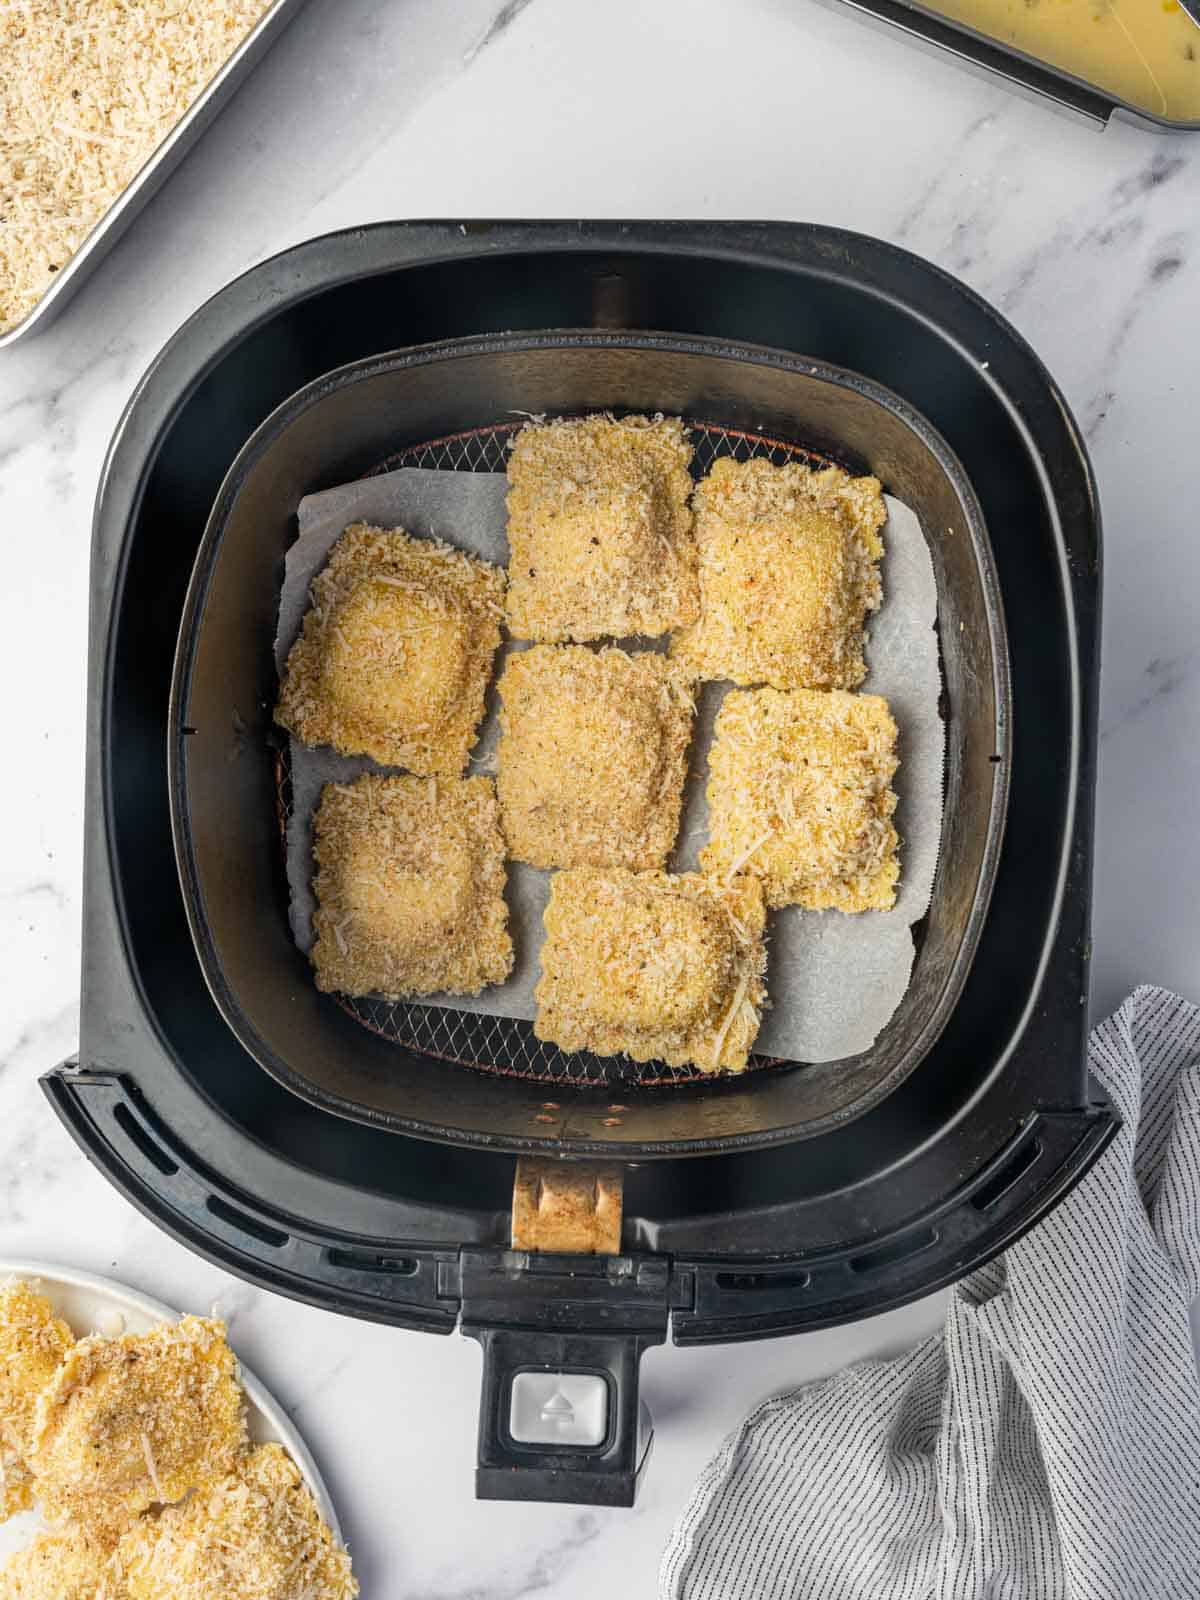 Breaded ravioli are in the air fryer basket in a single layer.